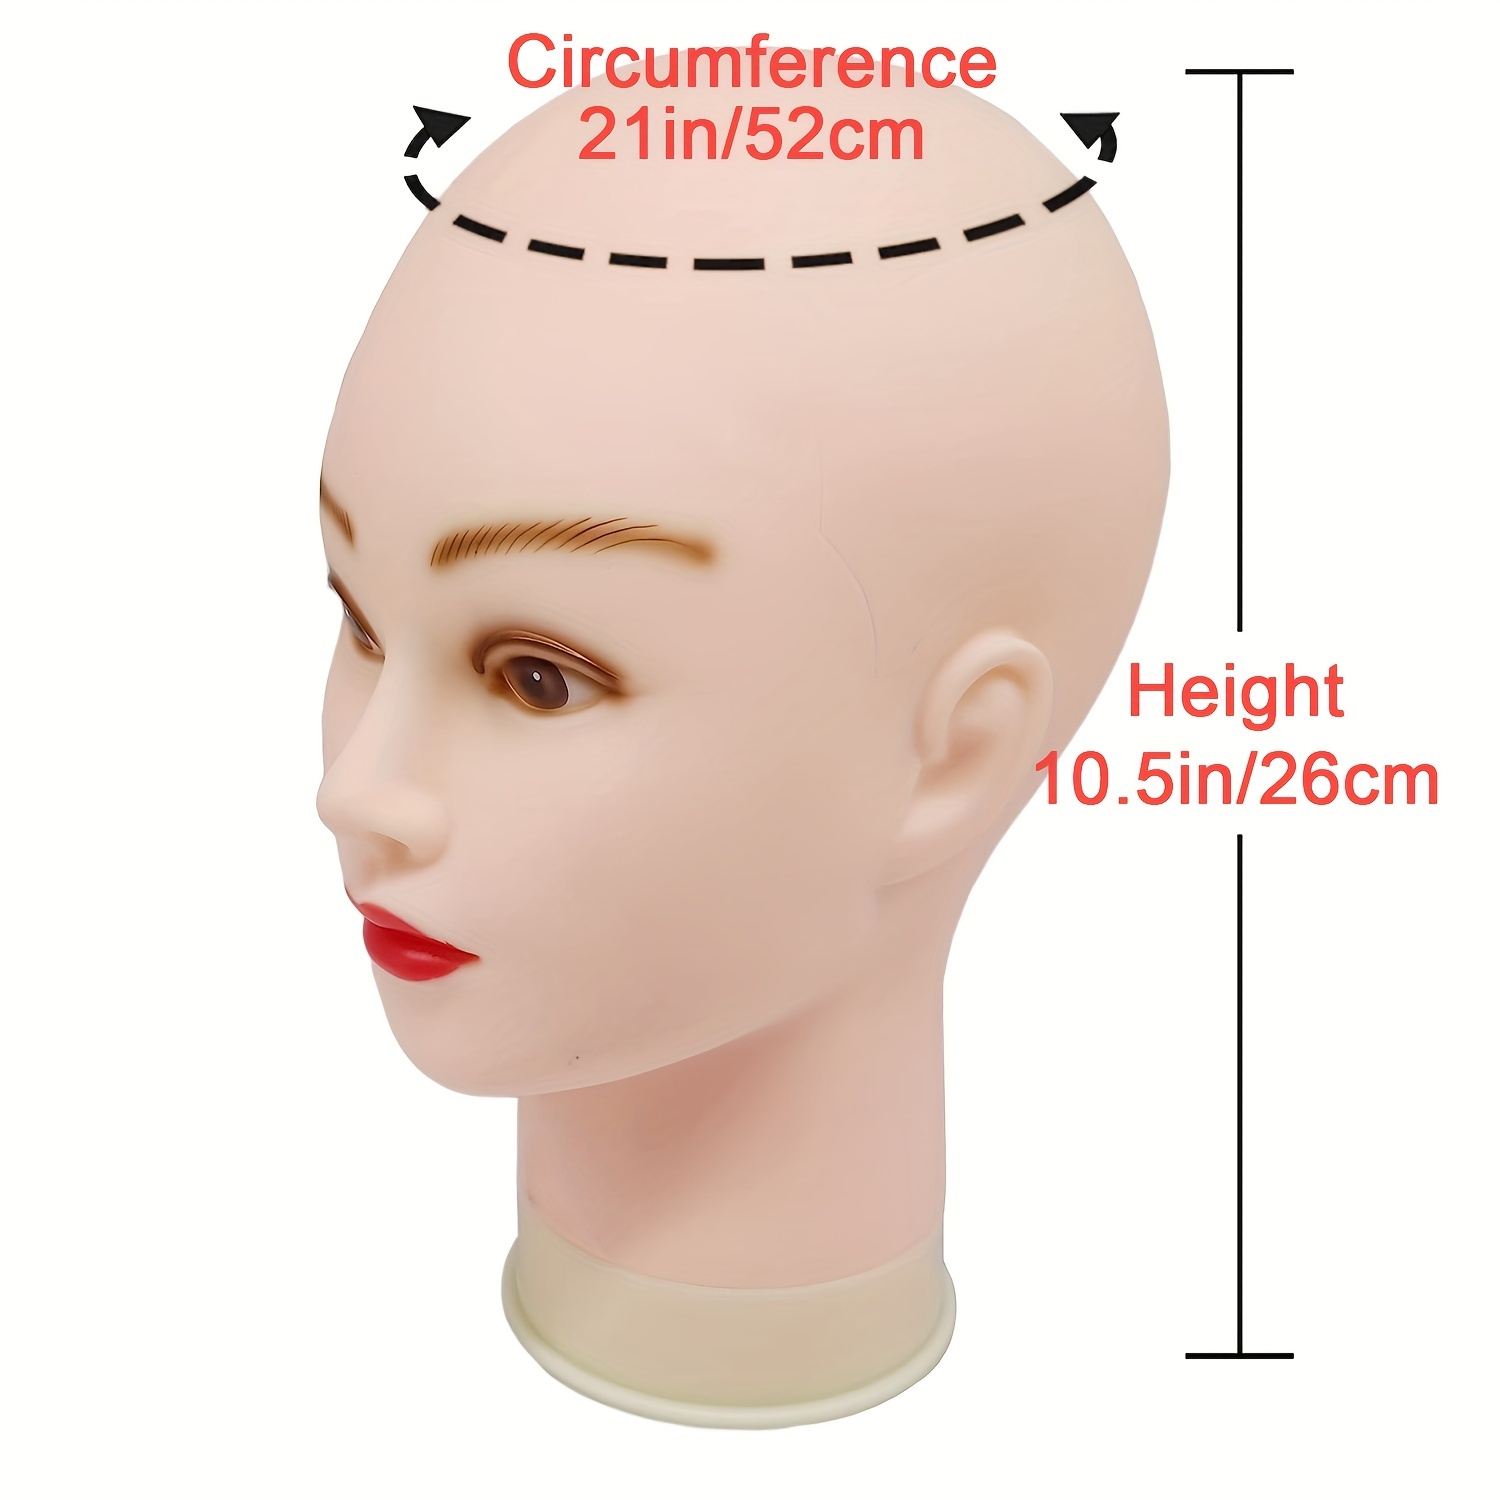 Professional Female Cosmetology Mannequin Head For Wig Making And